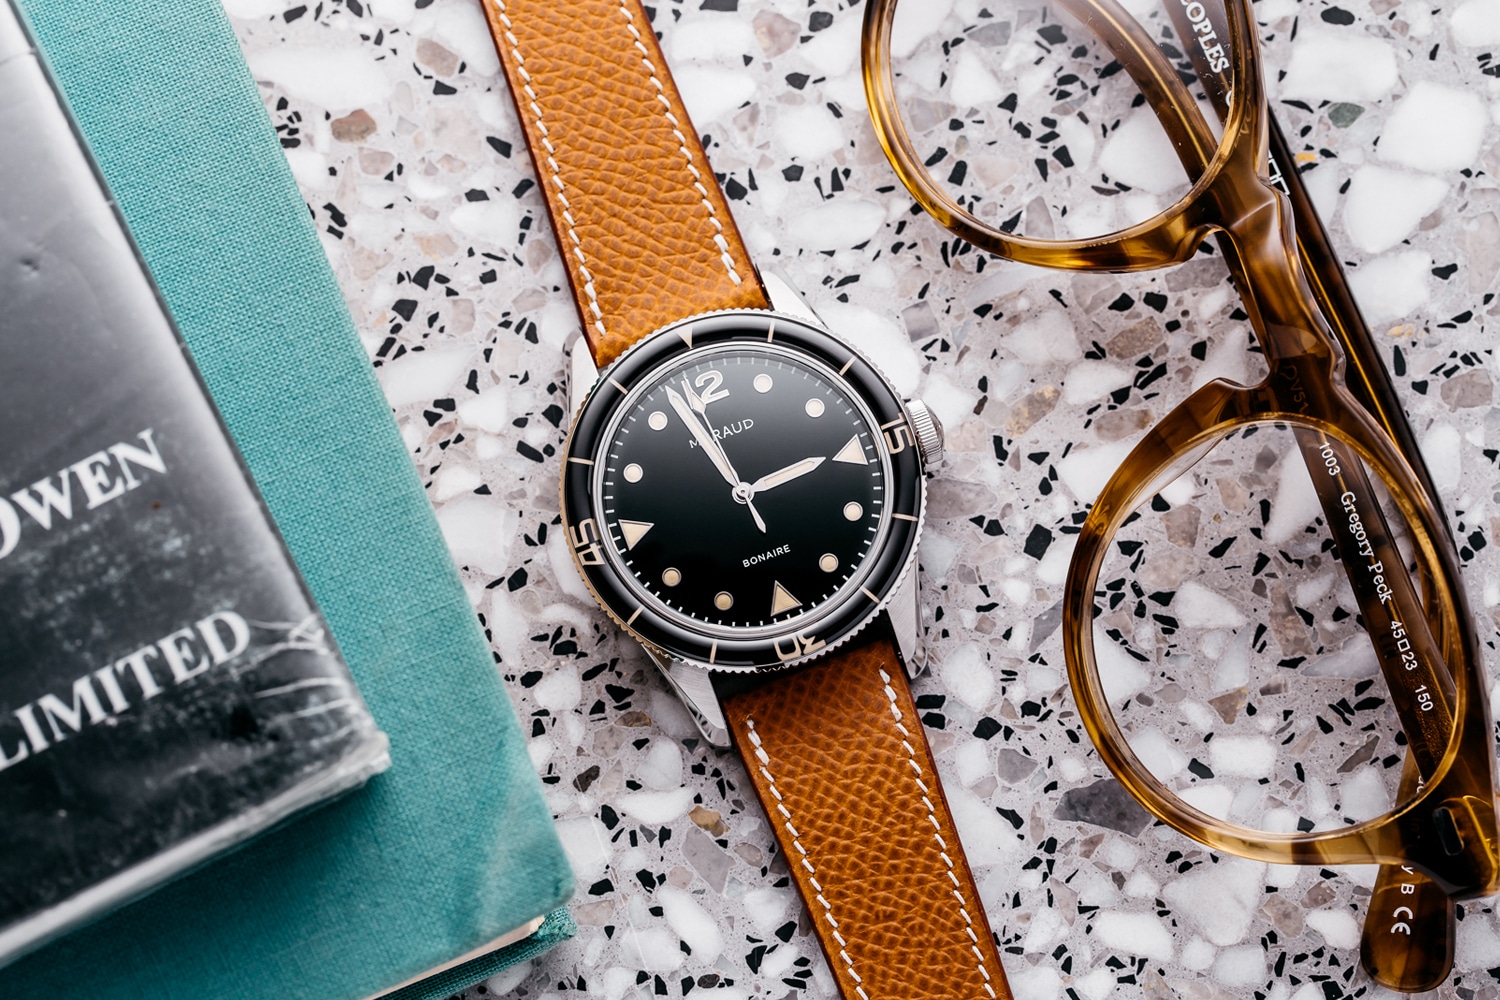 Vintage inspired watches. Watch up the this